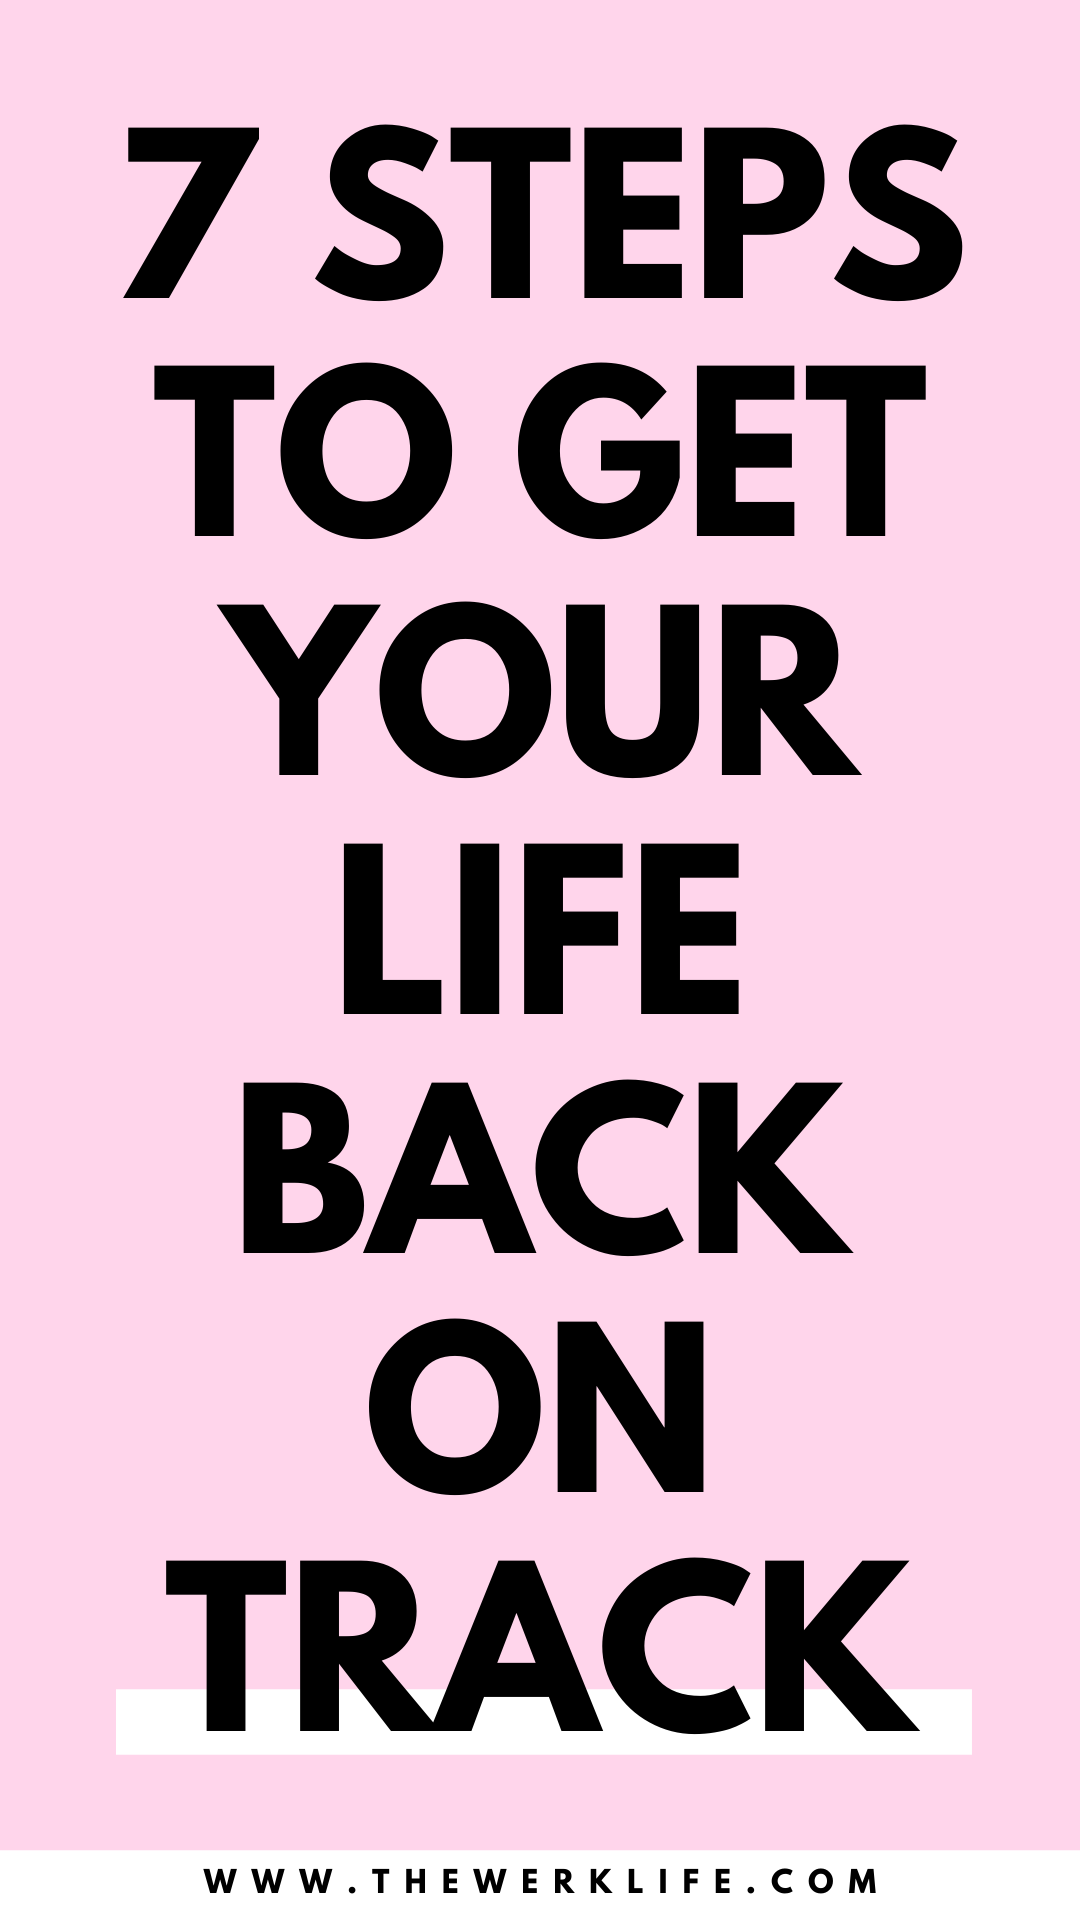 7 STEPS TO GET YOUR LIFE BACK ON TRACK